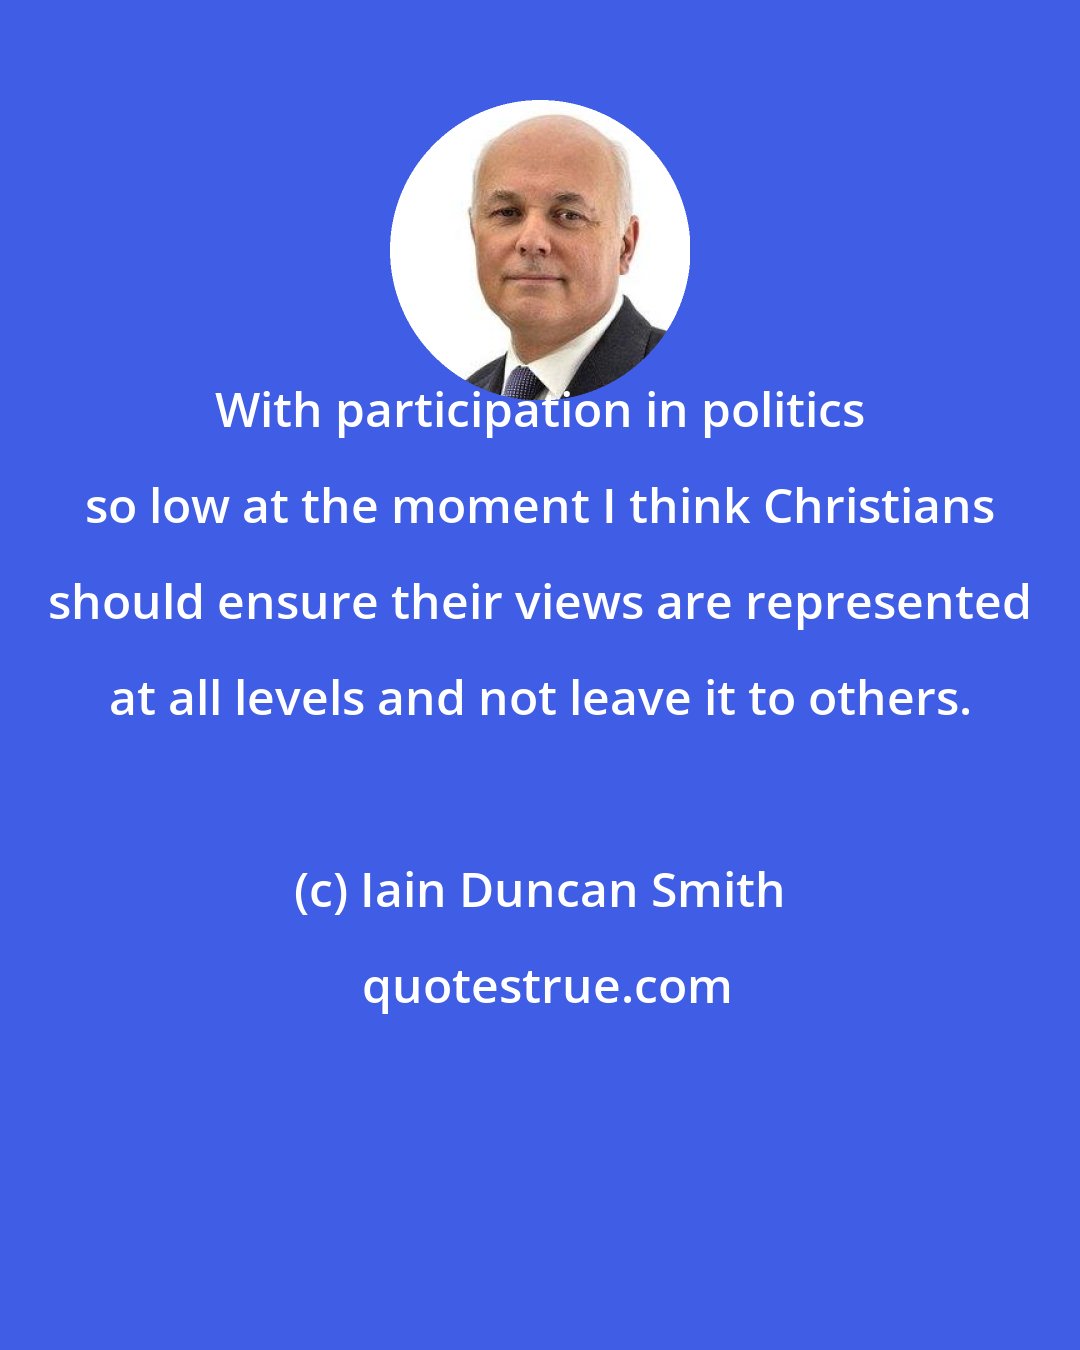 Iain Duncan Smith: With participation in politics so low at the moment I think Christians should ensure their views are represented at all levels and not leave it to others.